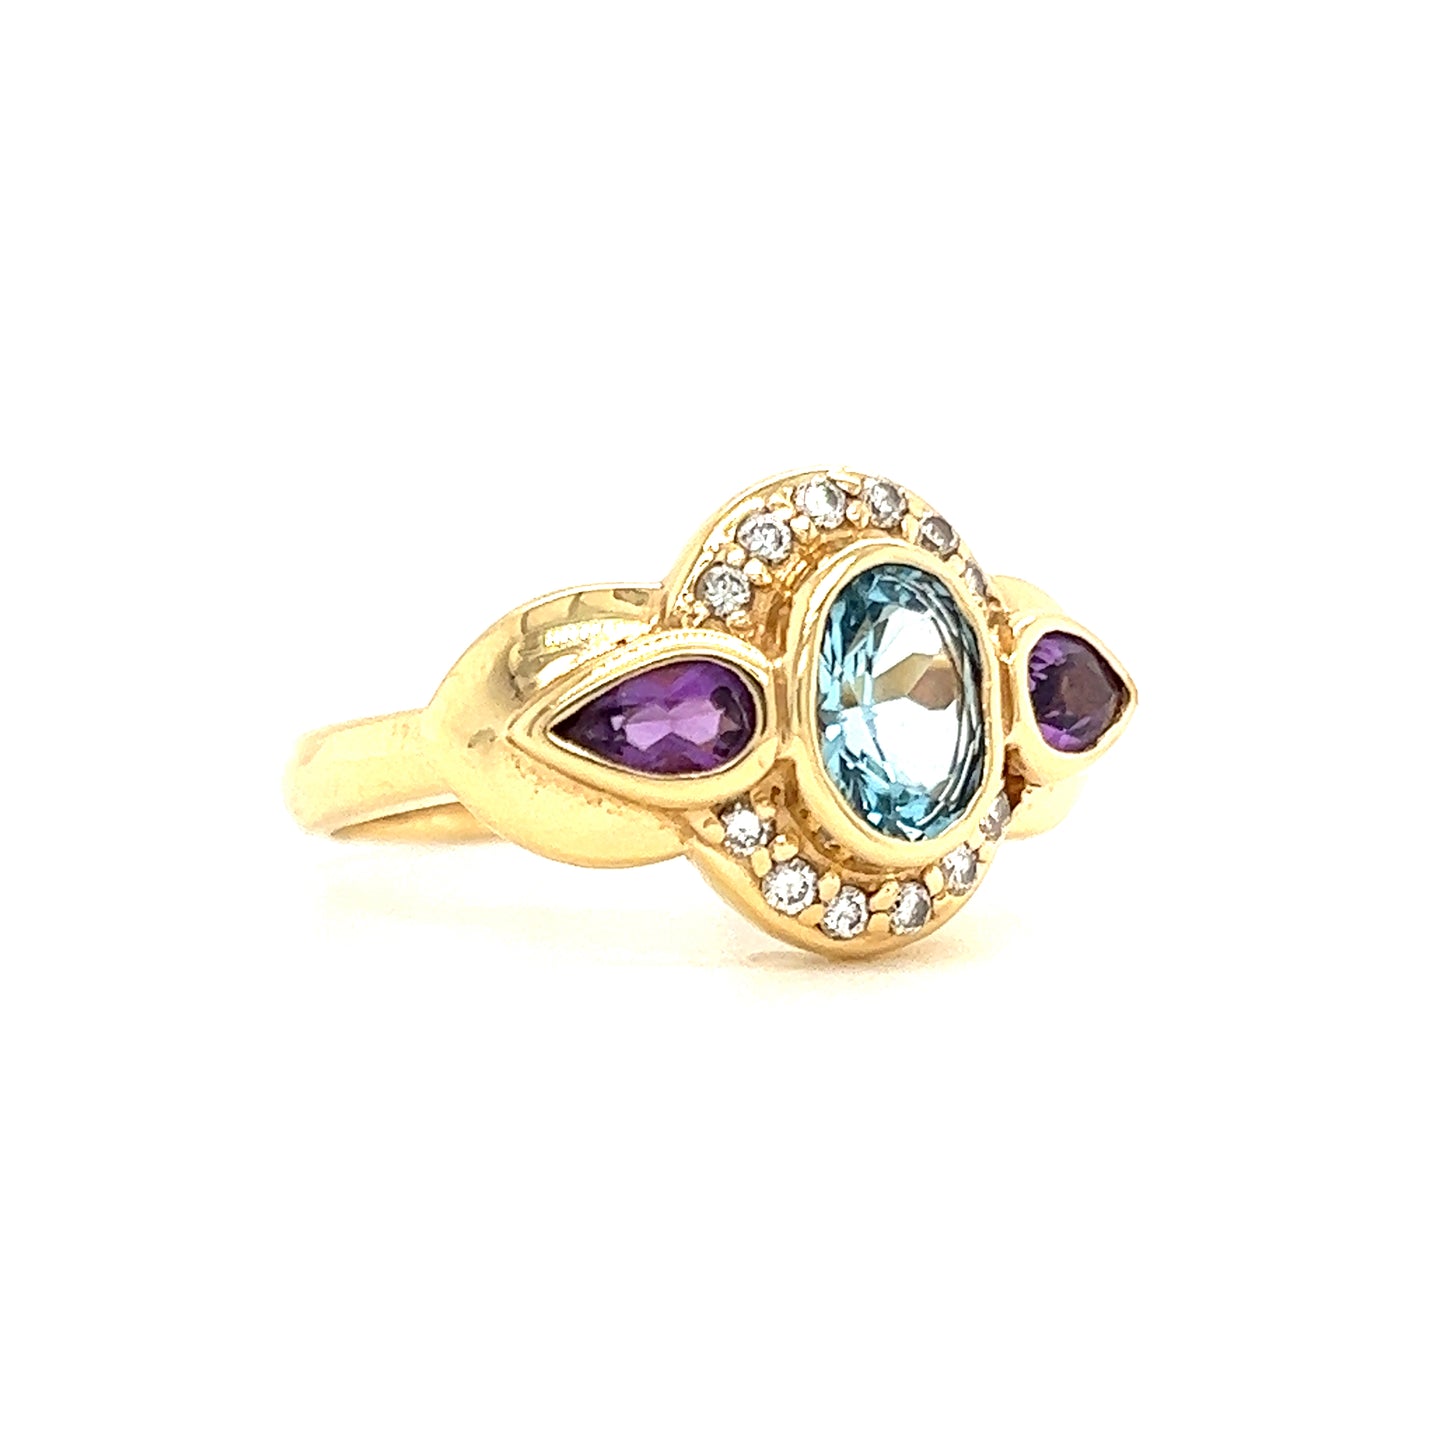 Blue Topaz Ring with Side Amethysts and Diamonds in 14K Yellow Gold Right Side View